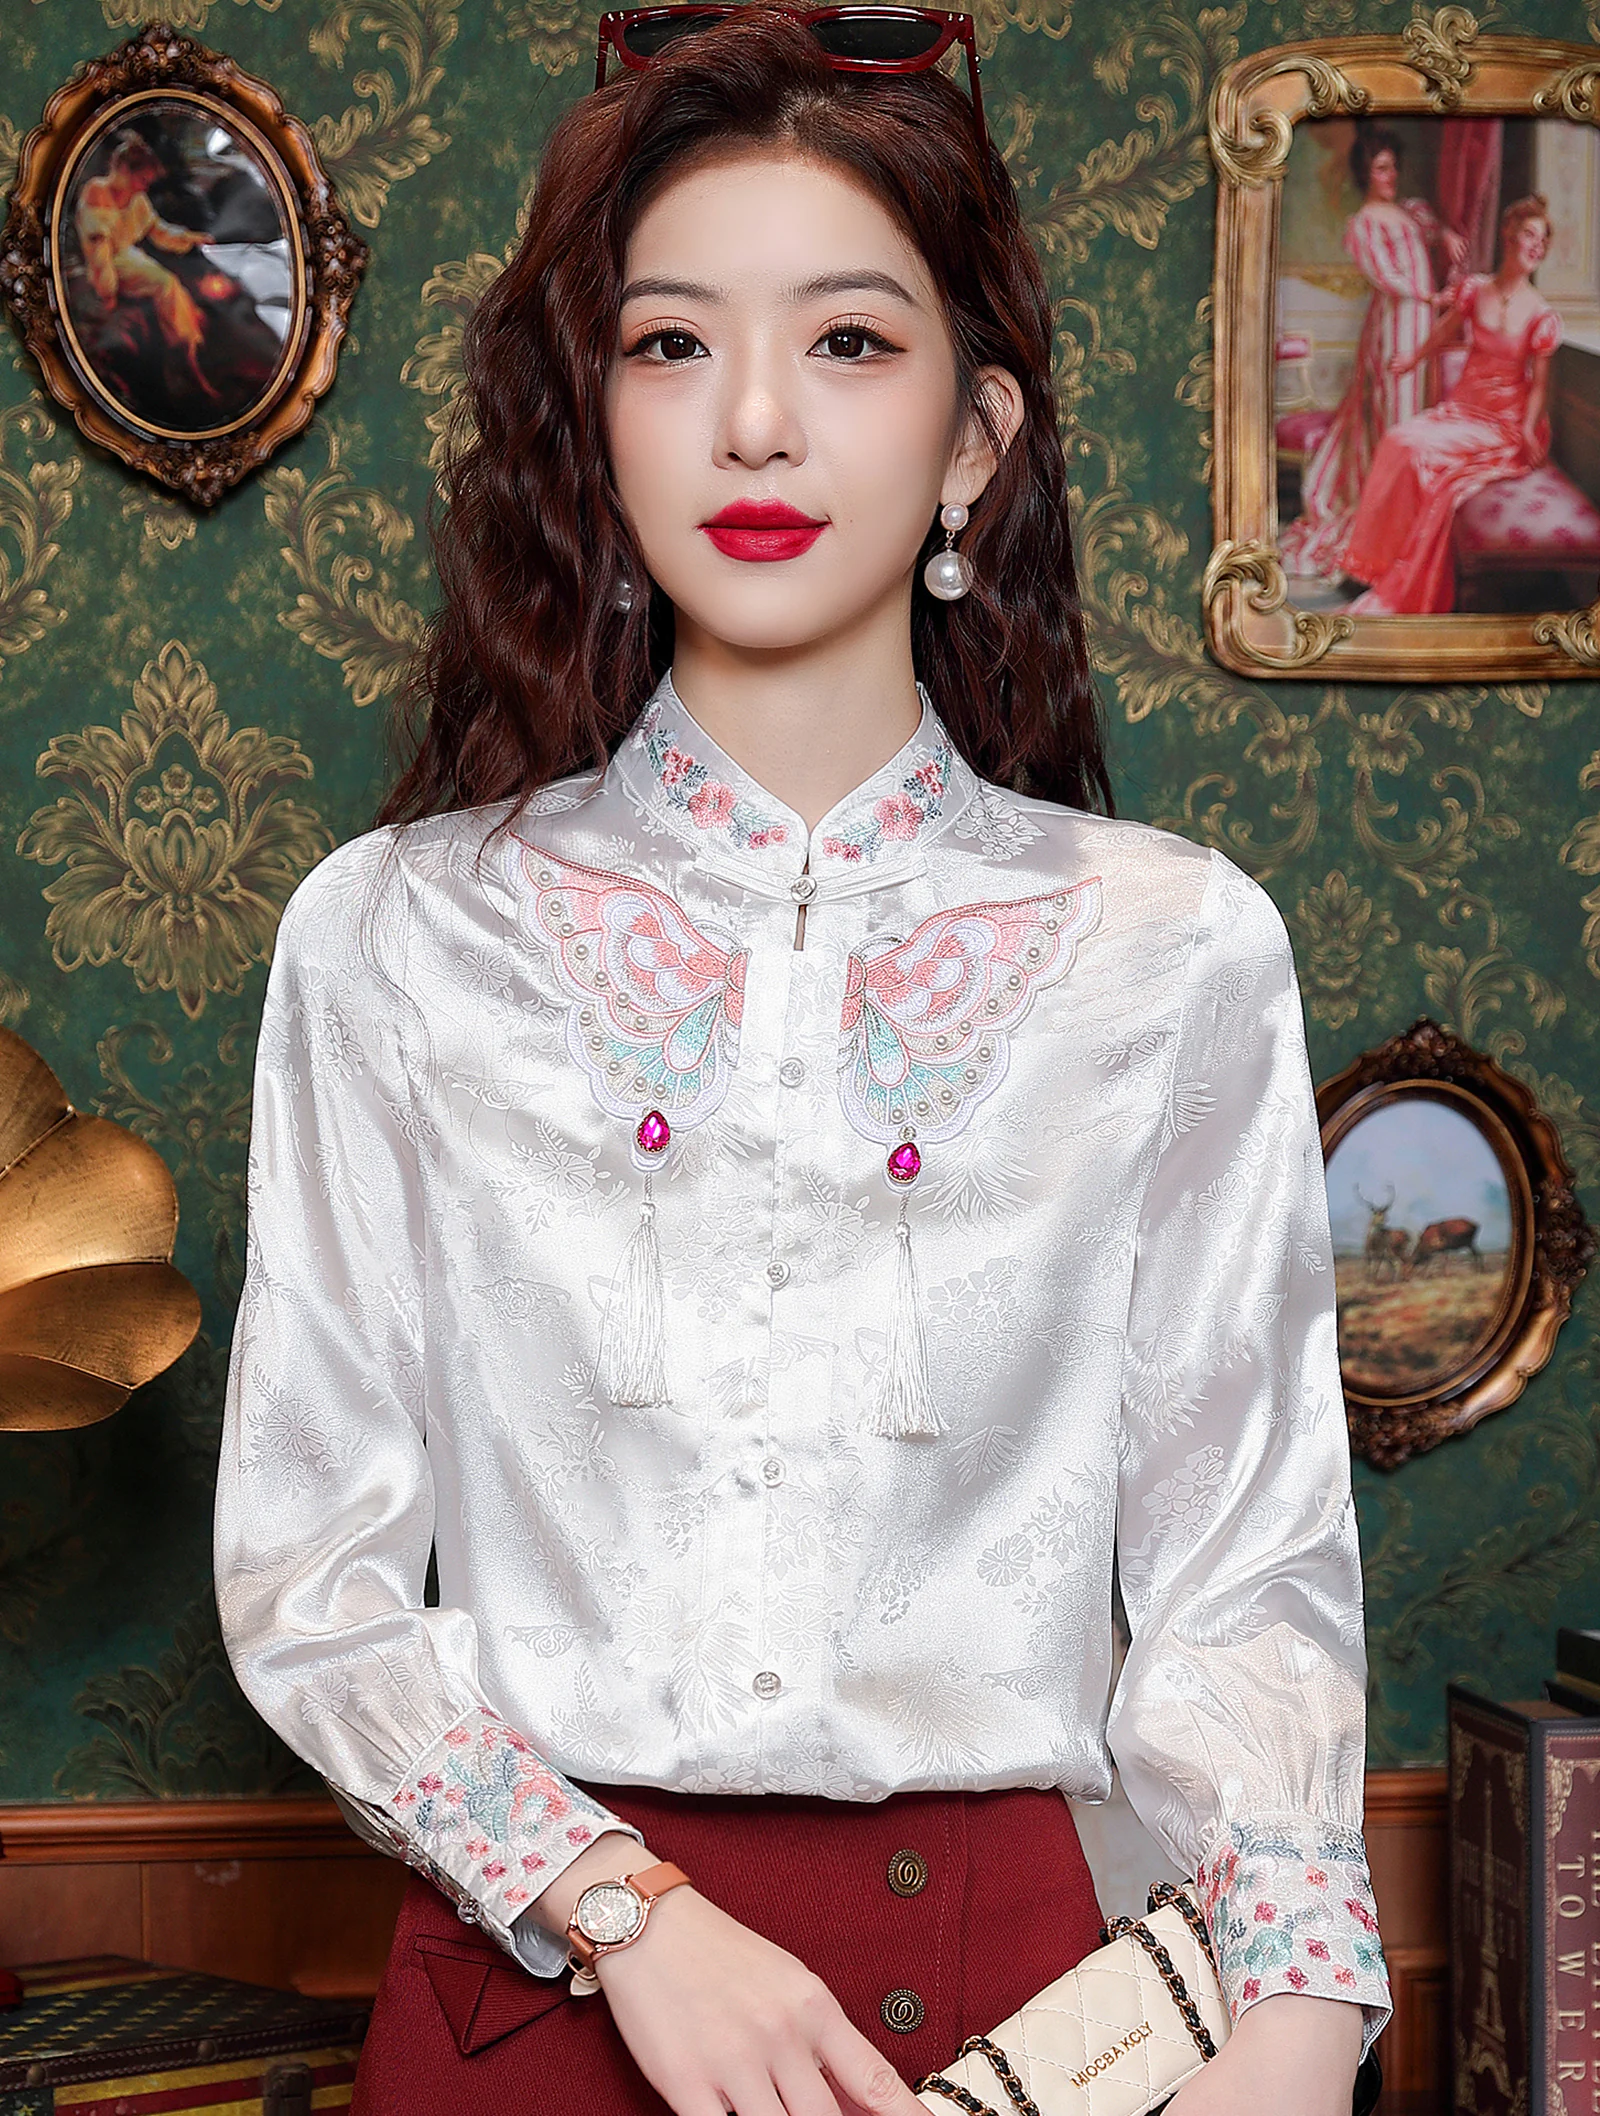 Women Classy Butterfly Embroidery Jacquard Satin Shirt Top Blouse01